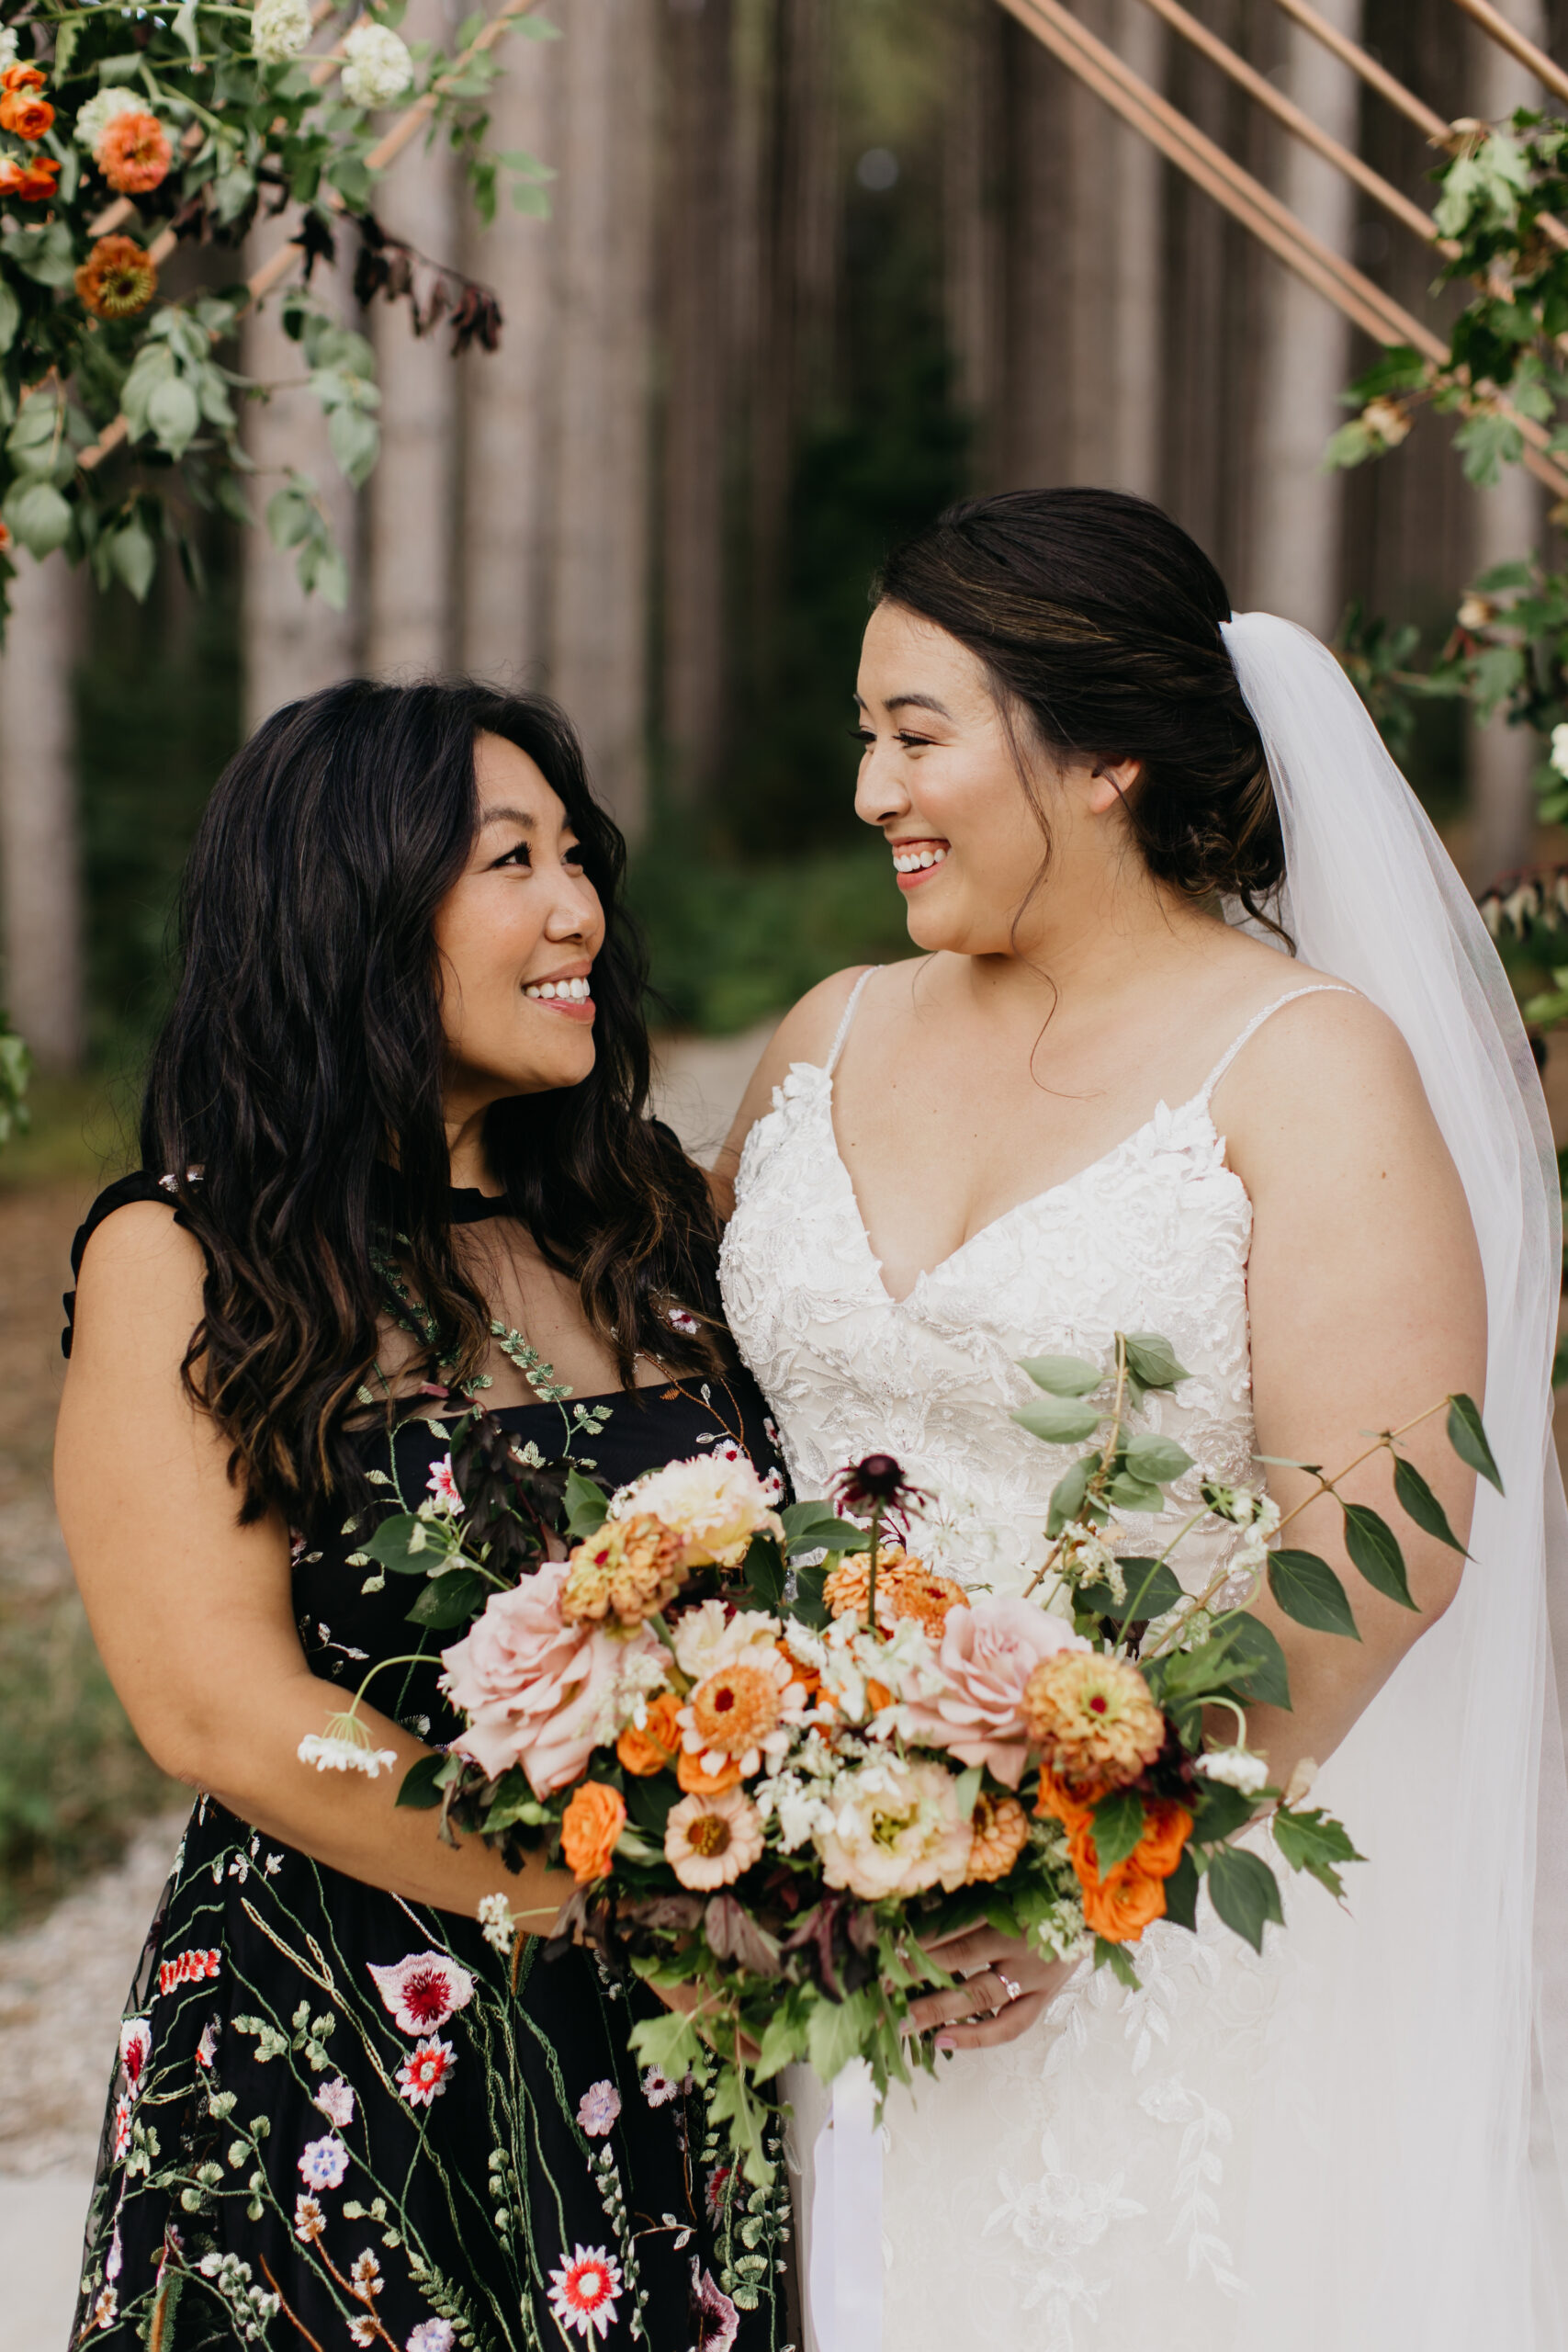 A photo of the bride and her mother during the wedding ceremony